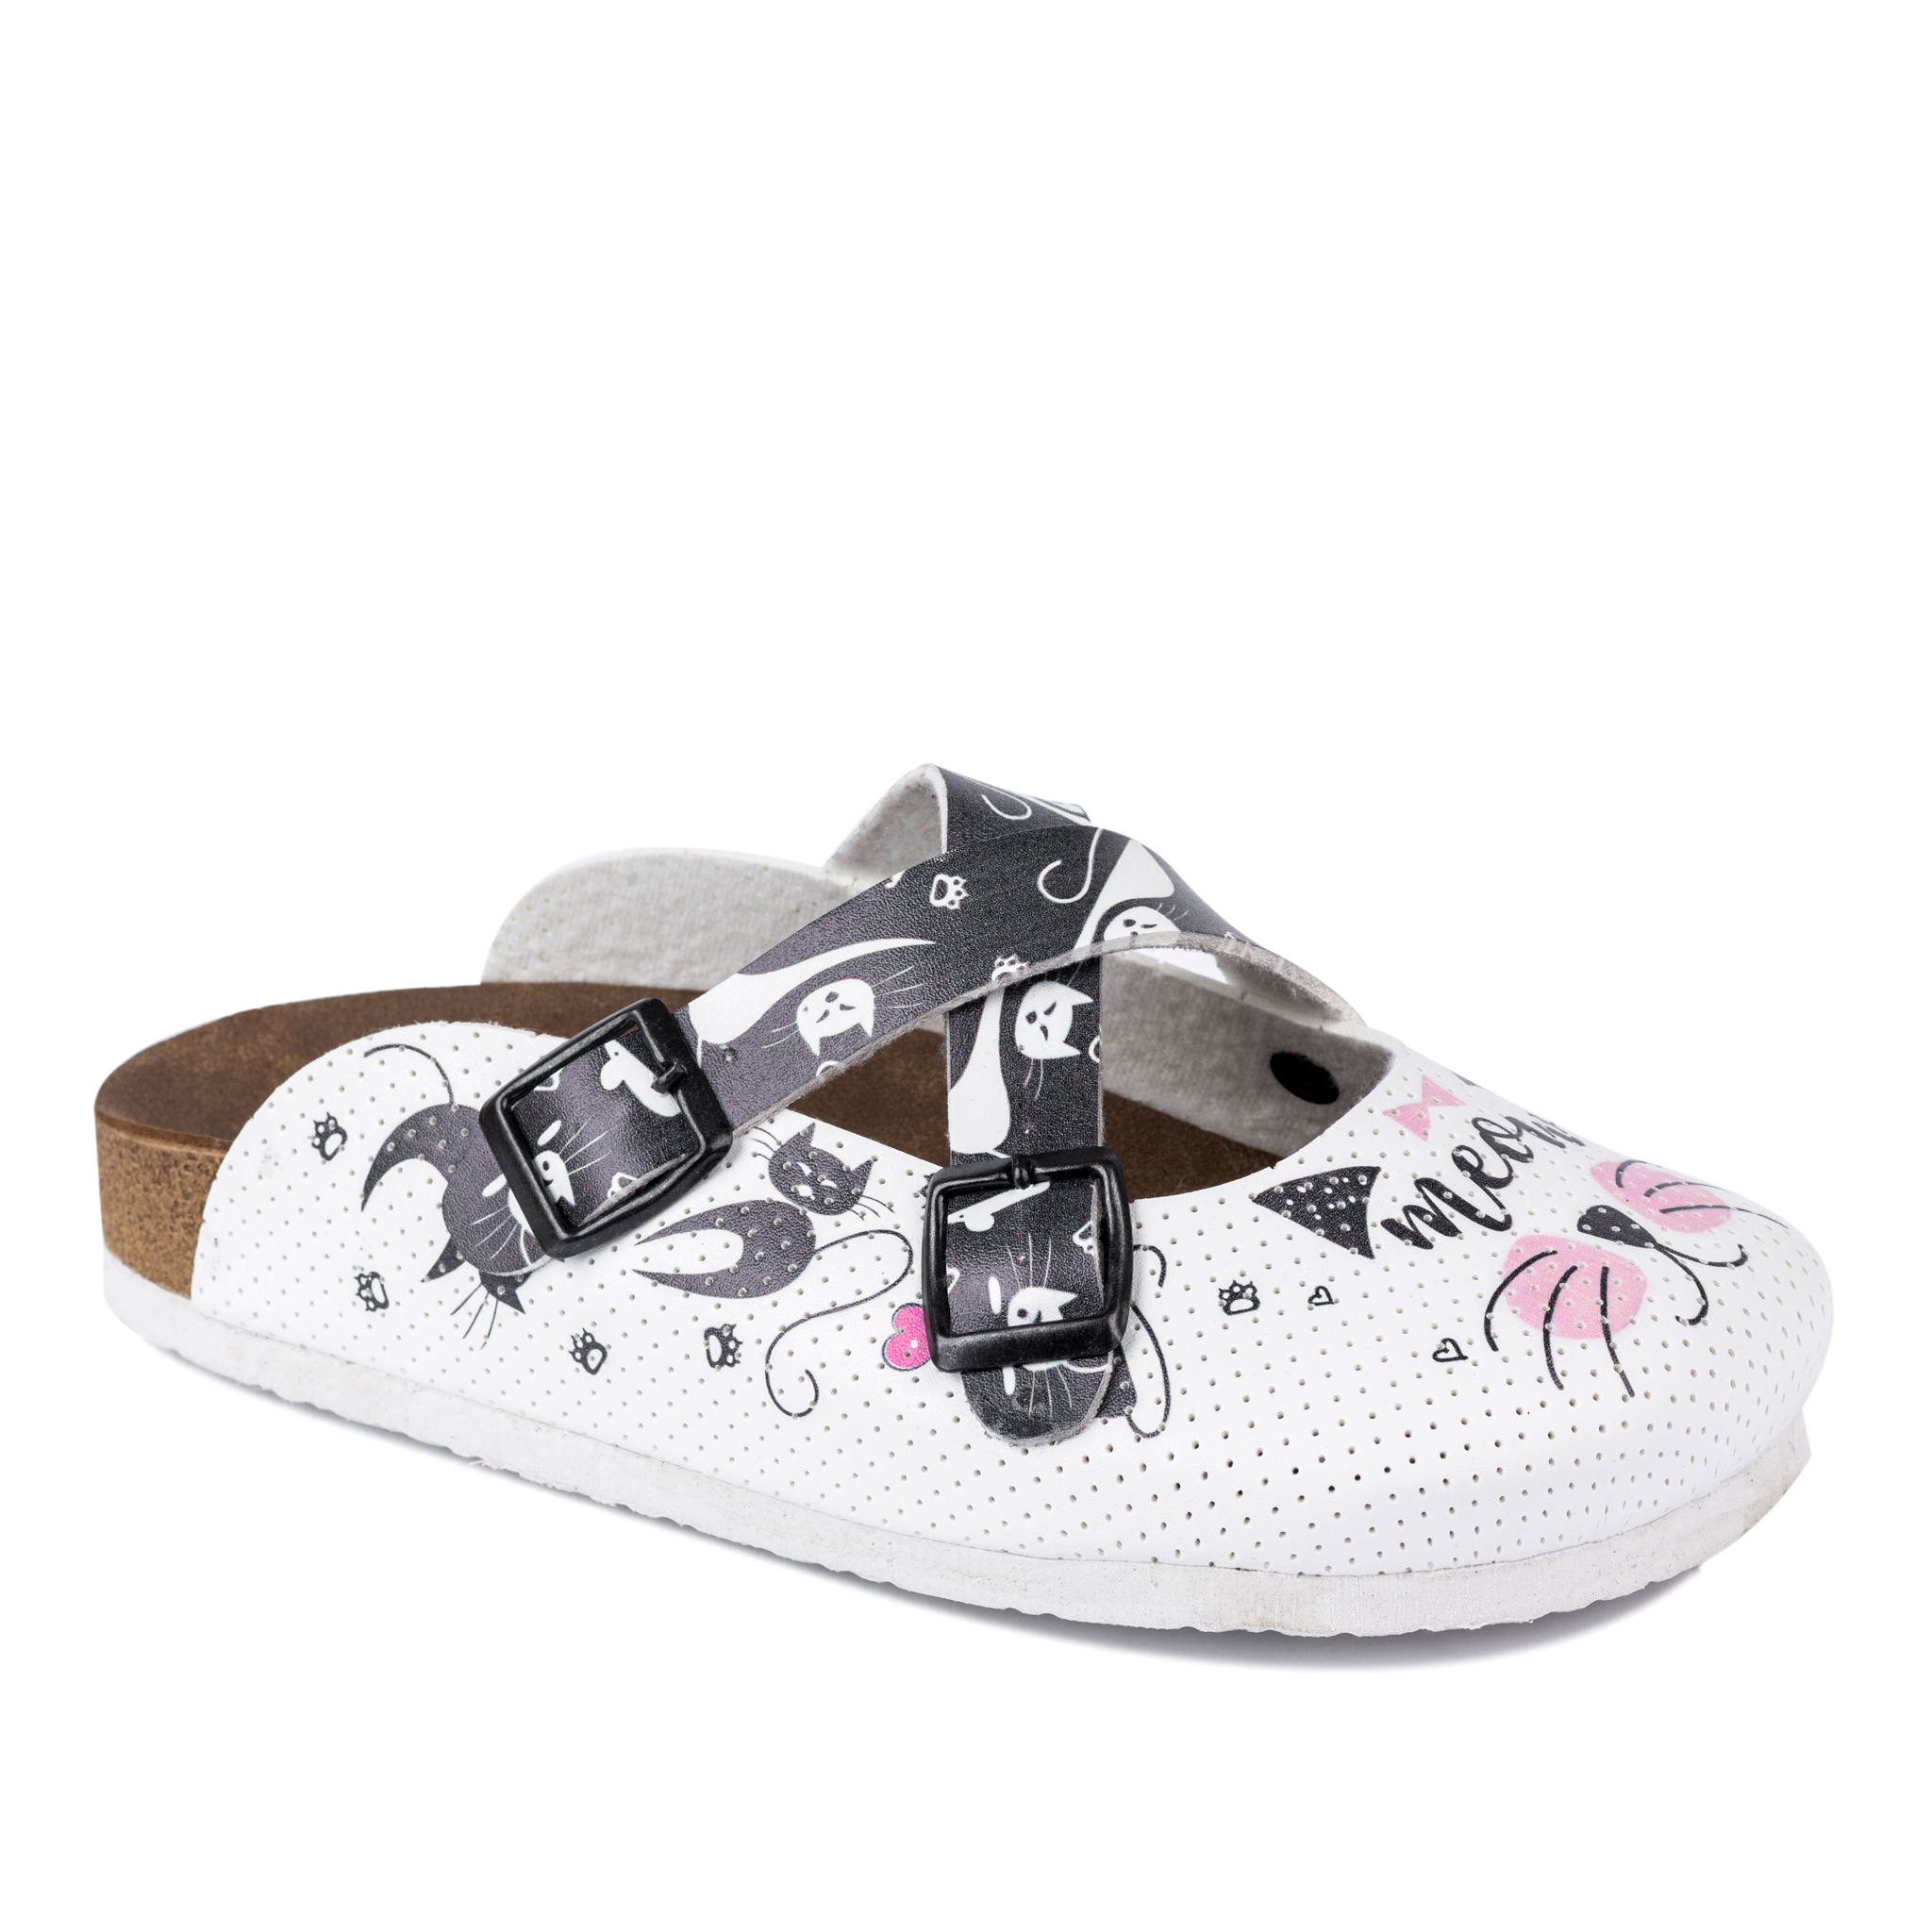 Patterned women clogs A149 - CAT - WHITE